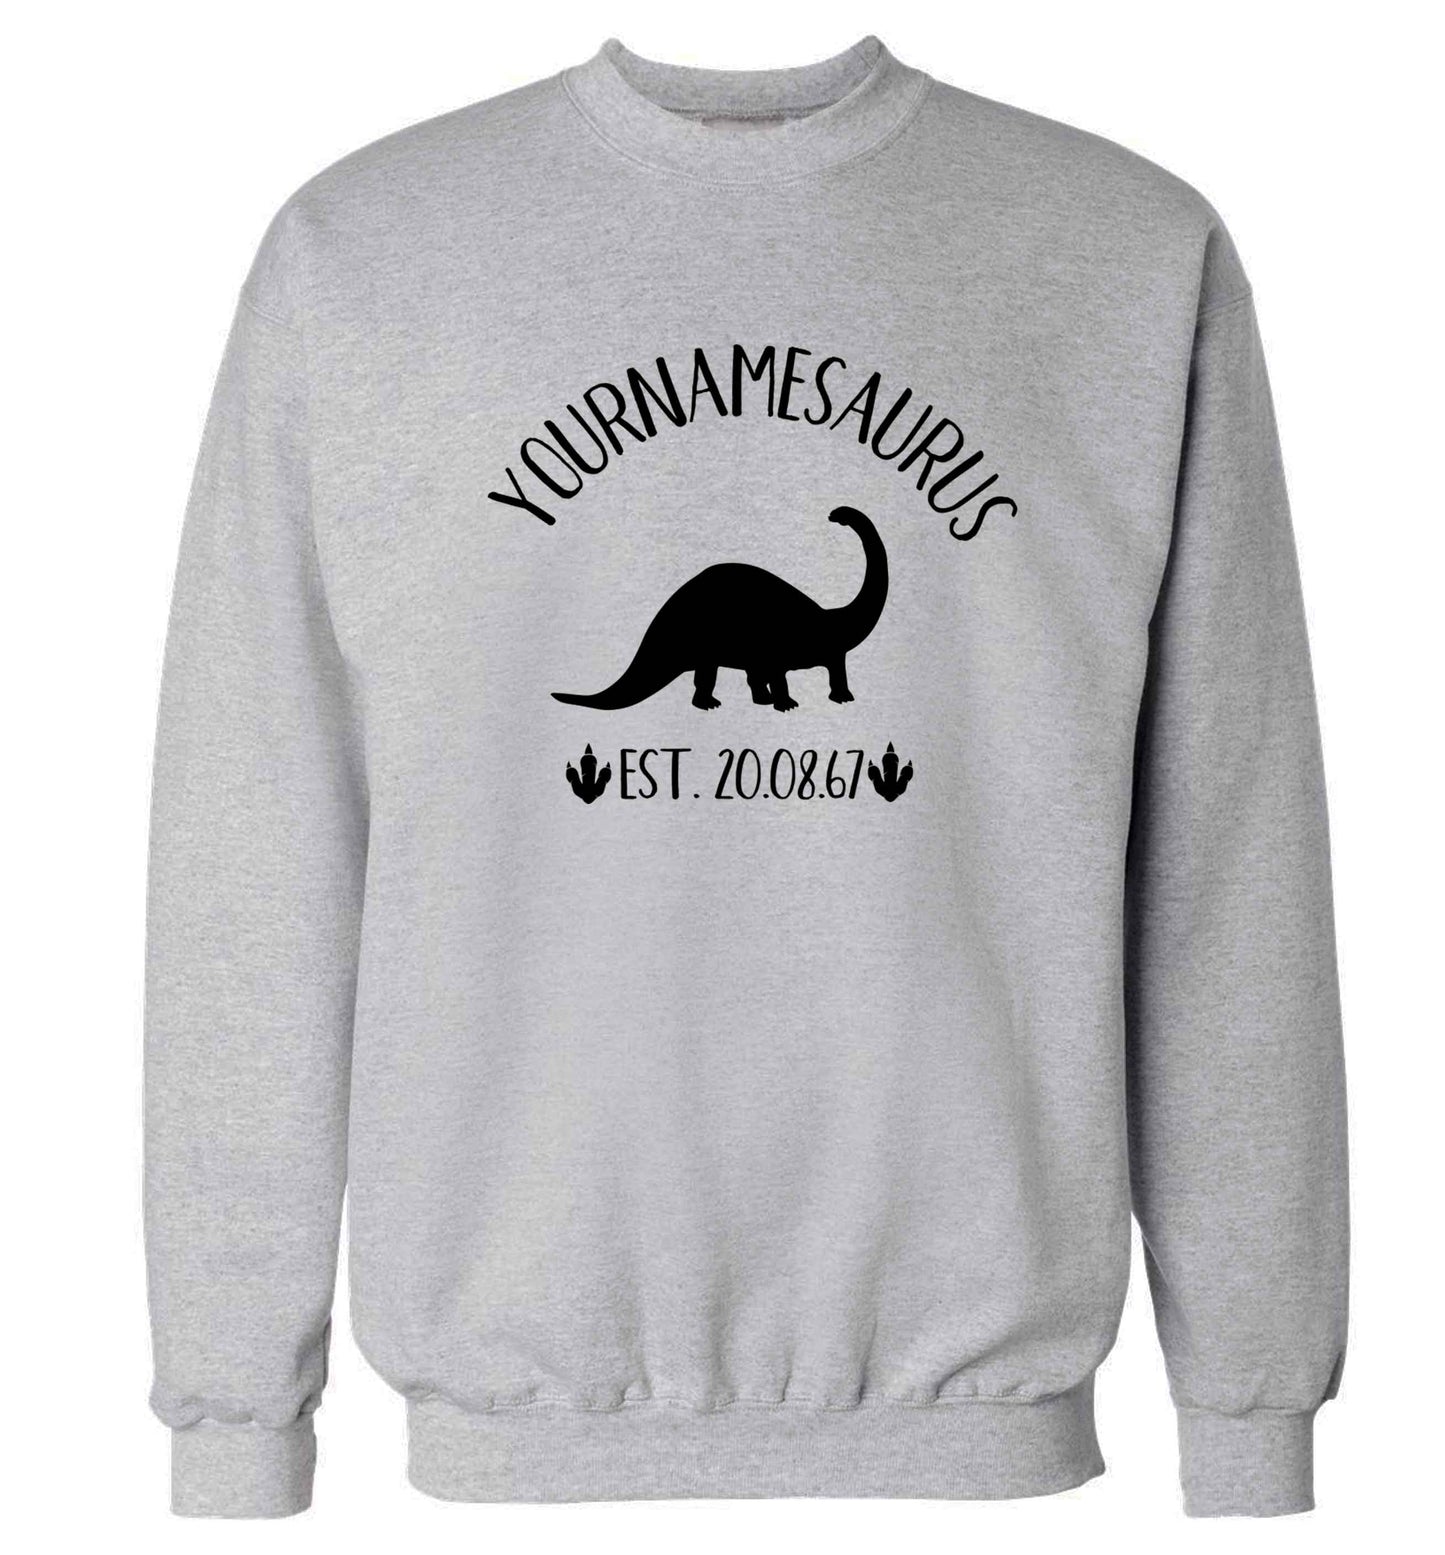 Personalised (your name) dinosaur birthday Adult's unisex grey Sweater 2XL